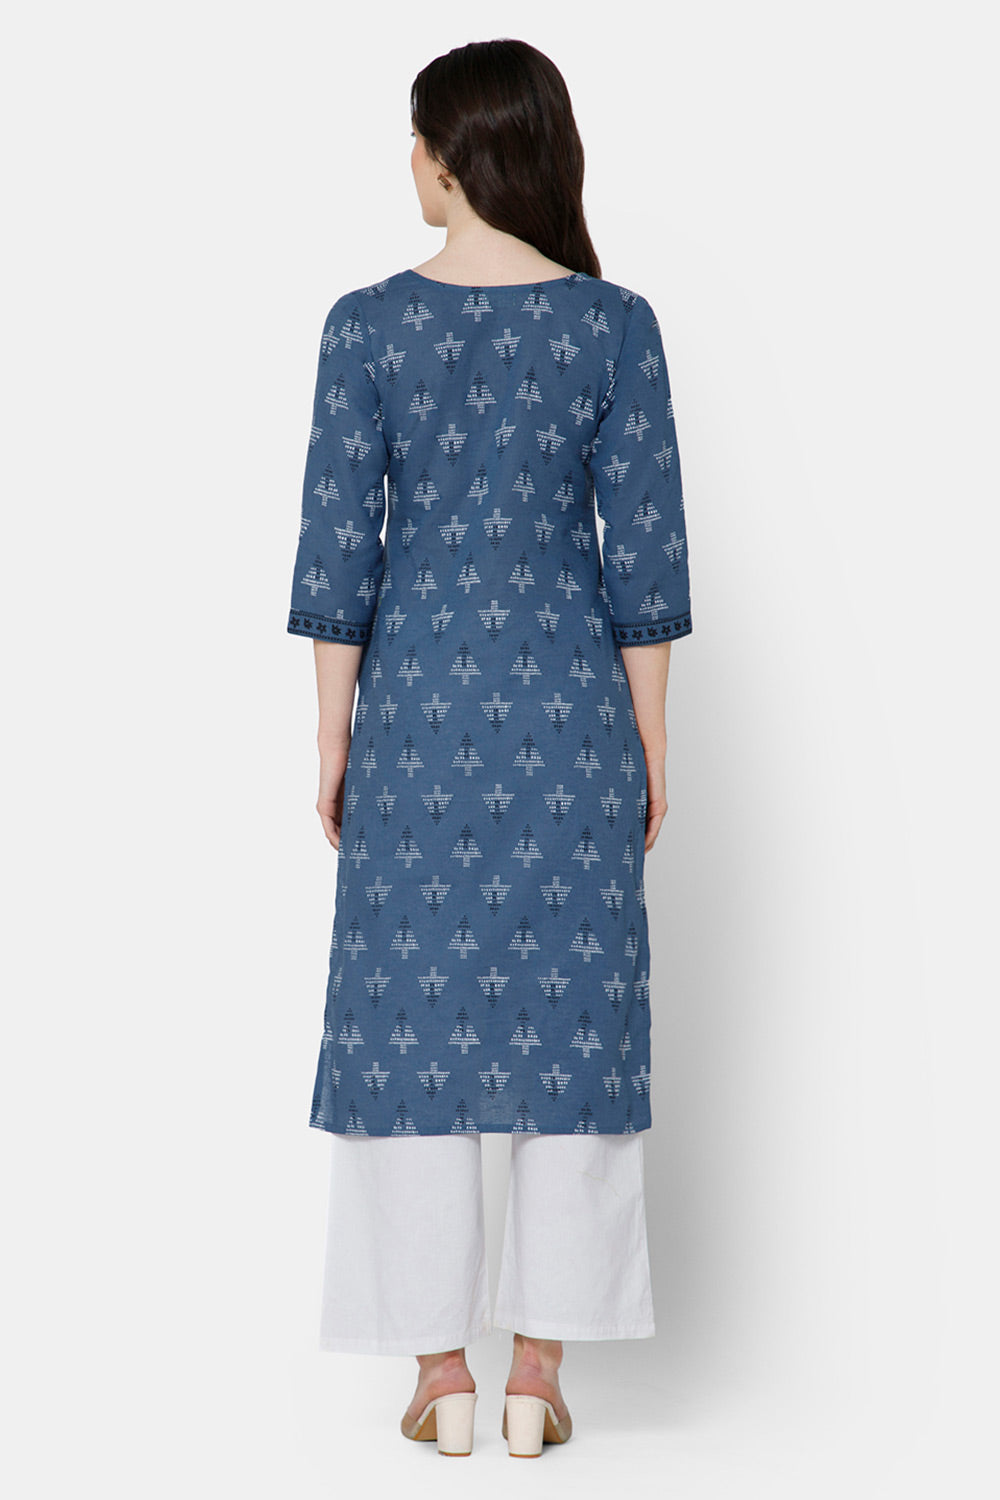 Mythri Women's Casual Kurthi with Patchwork And Minimalistic Embroidery - Blue - E028